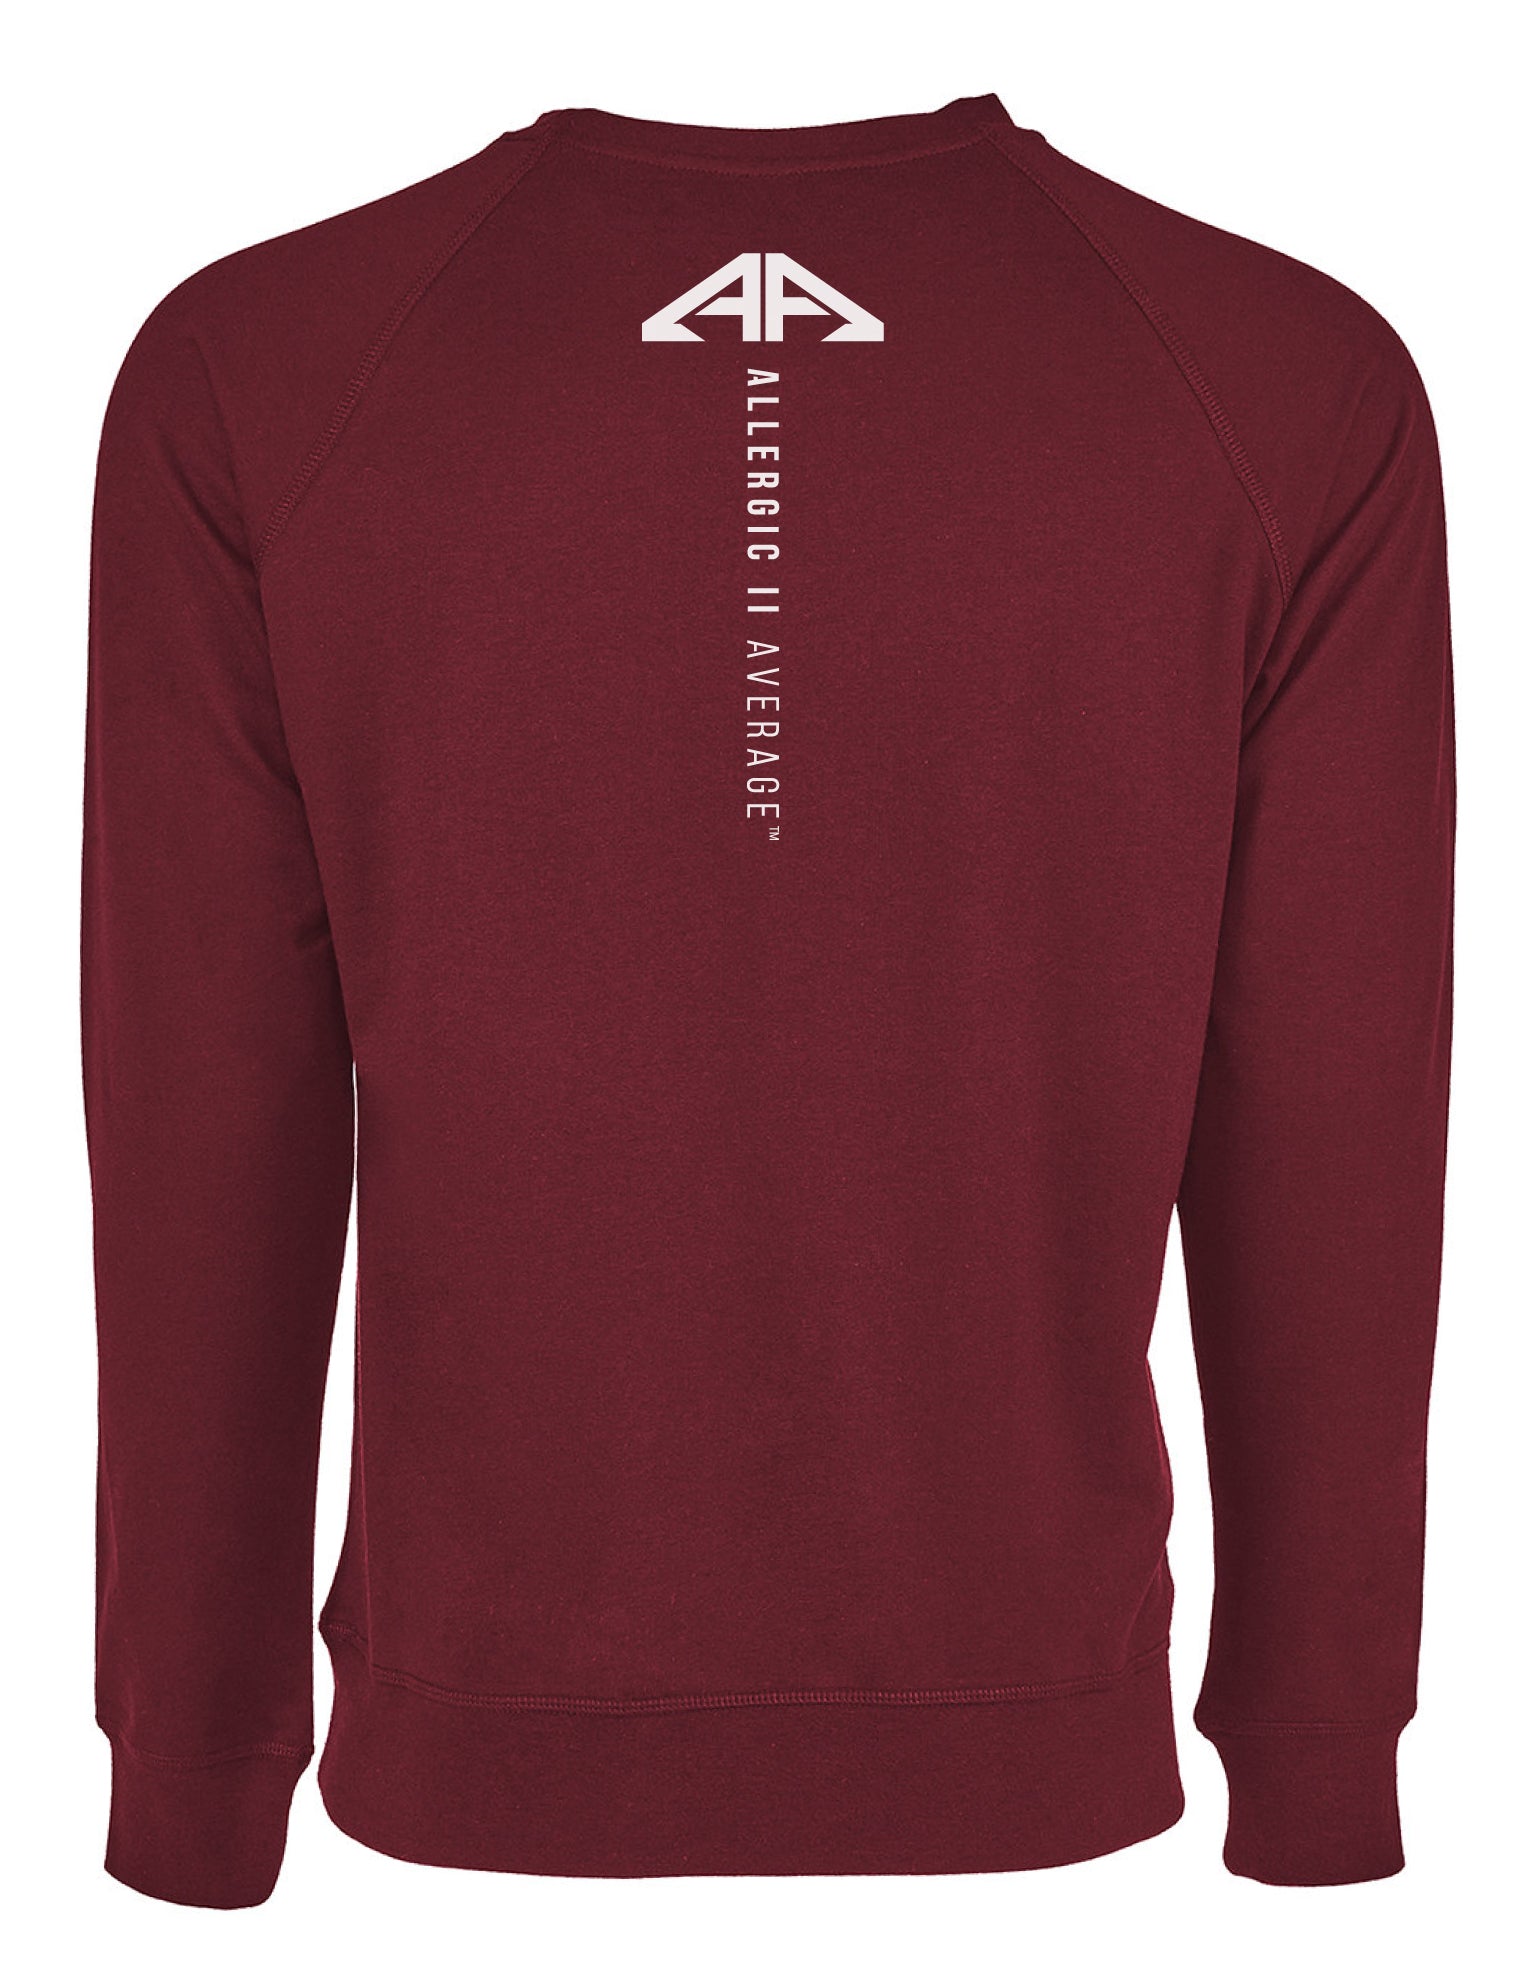 The Classic - Long Sleeve